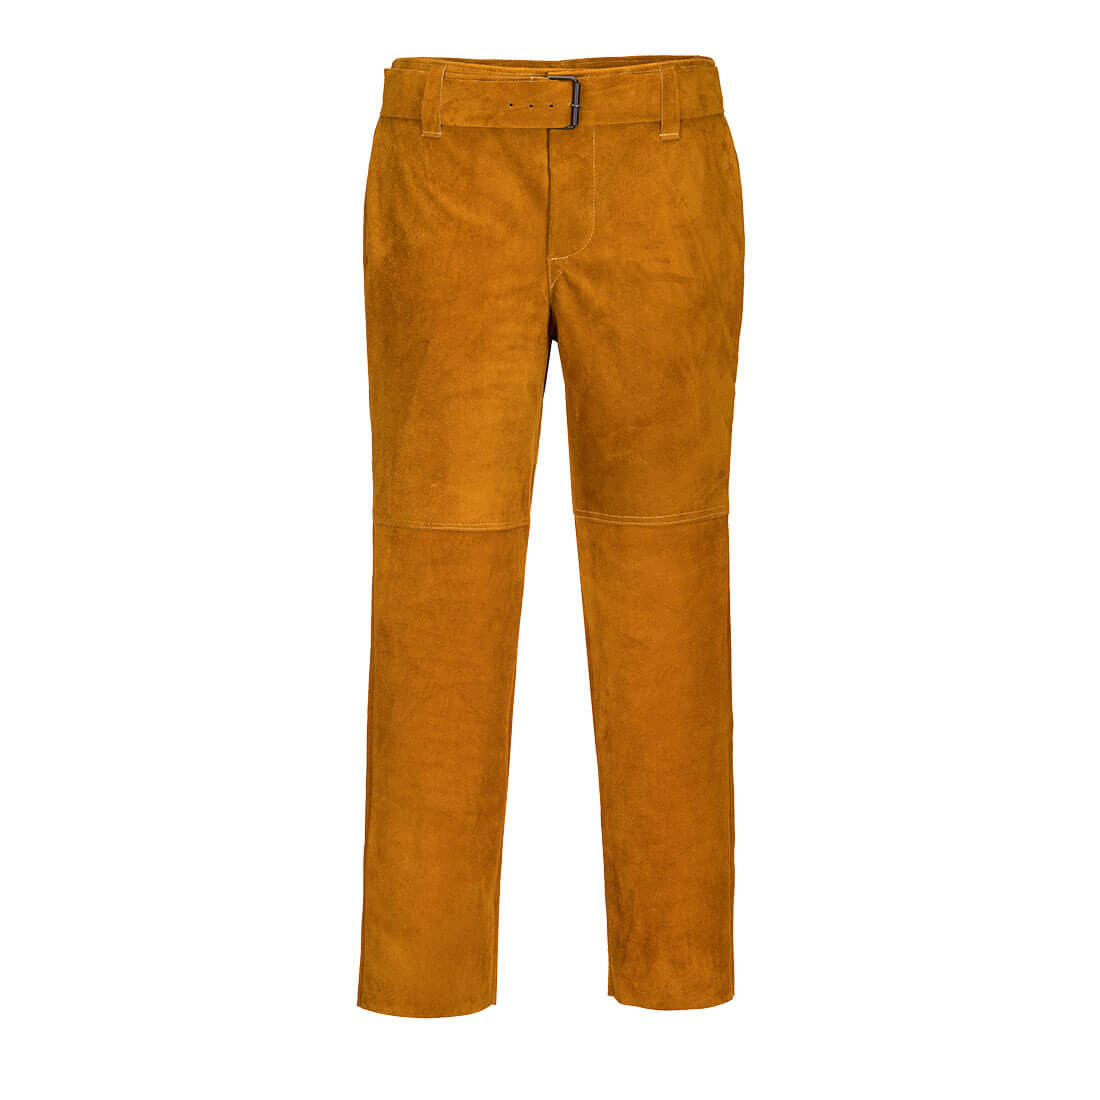 Leather Welding Trouser - Personal protection